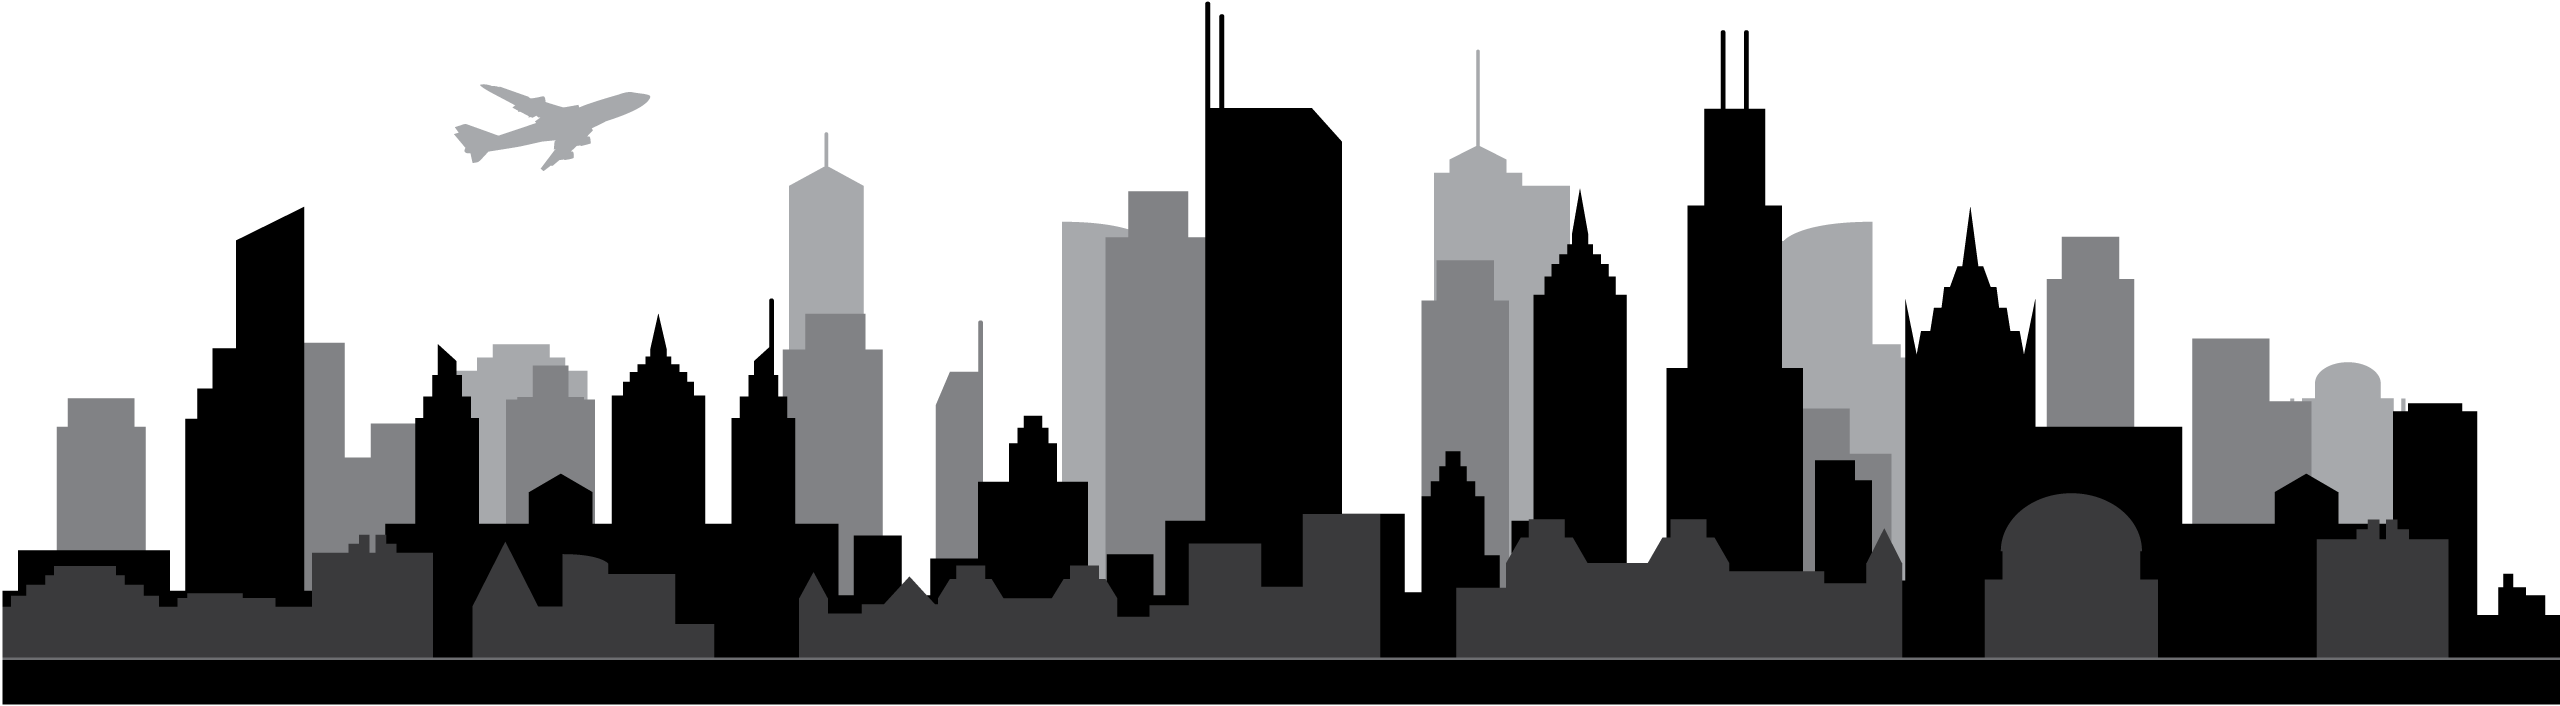 Chicago Skyline Silhouette - skyline png download - 2560*706 - Free